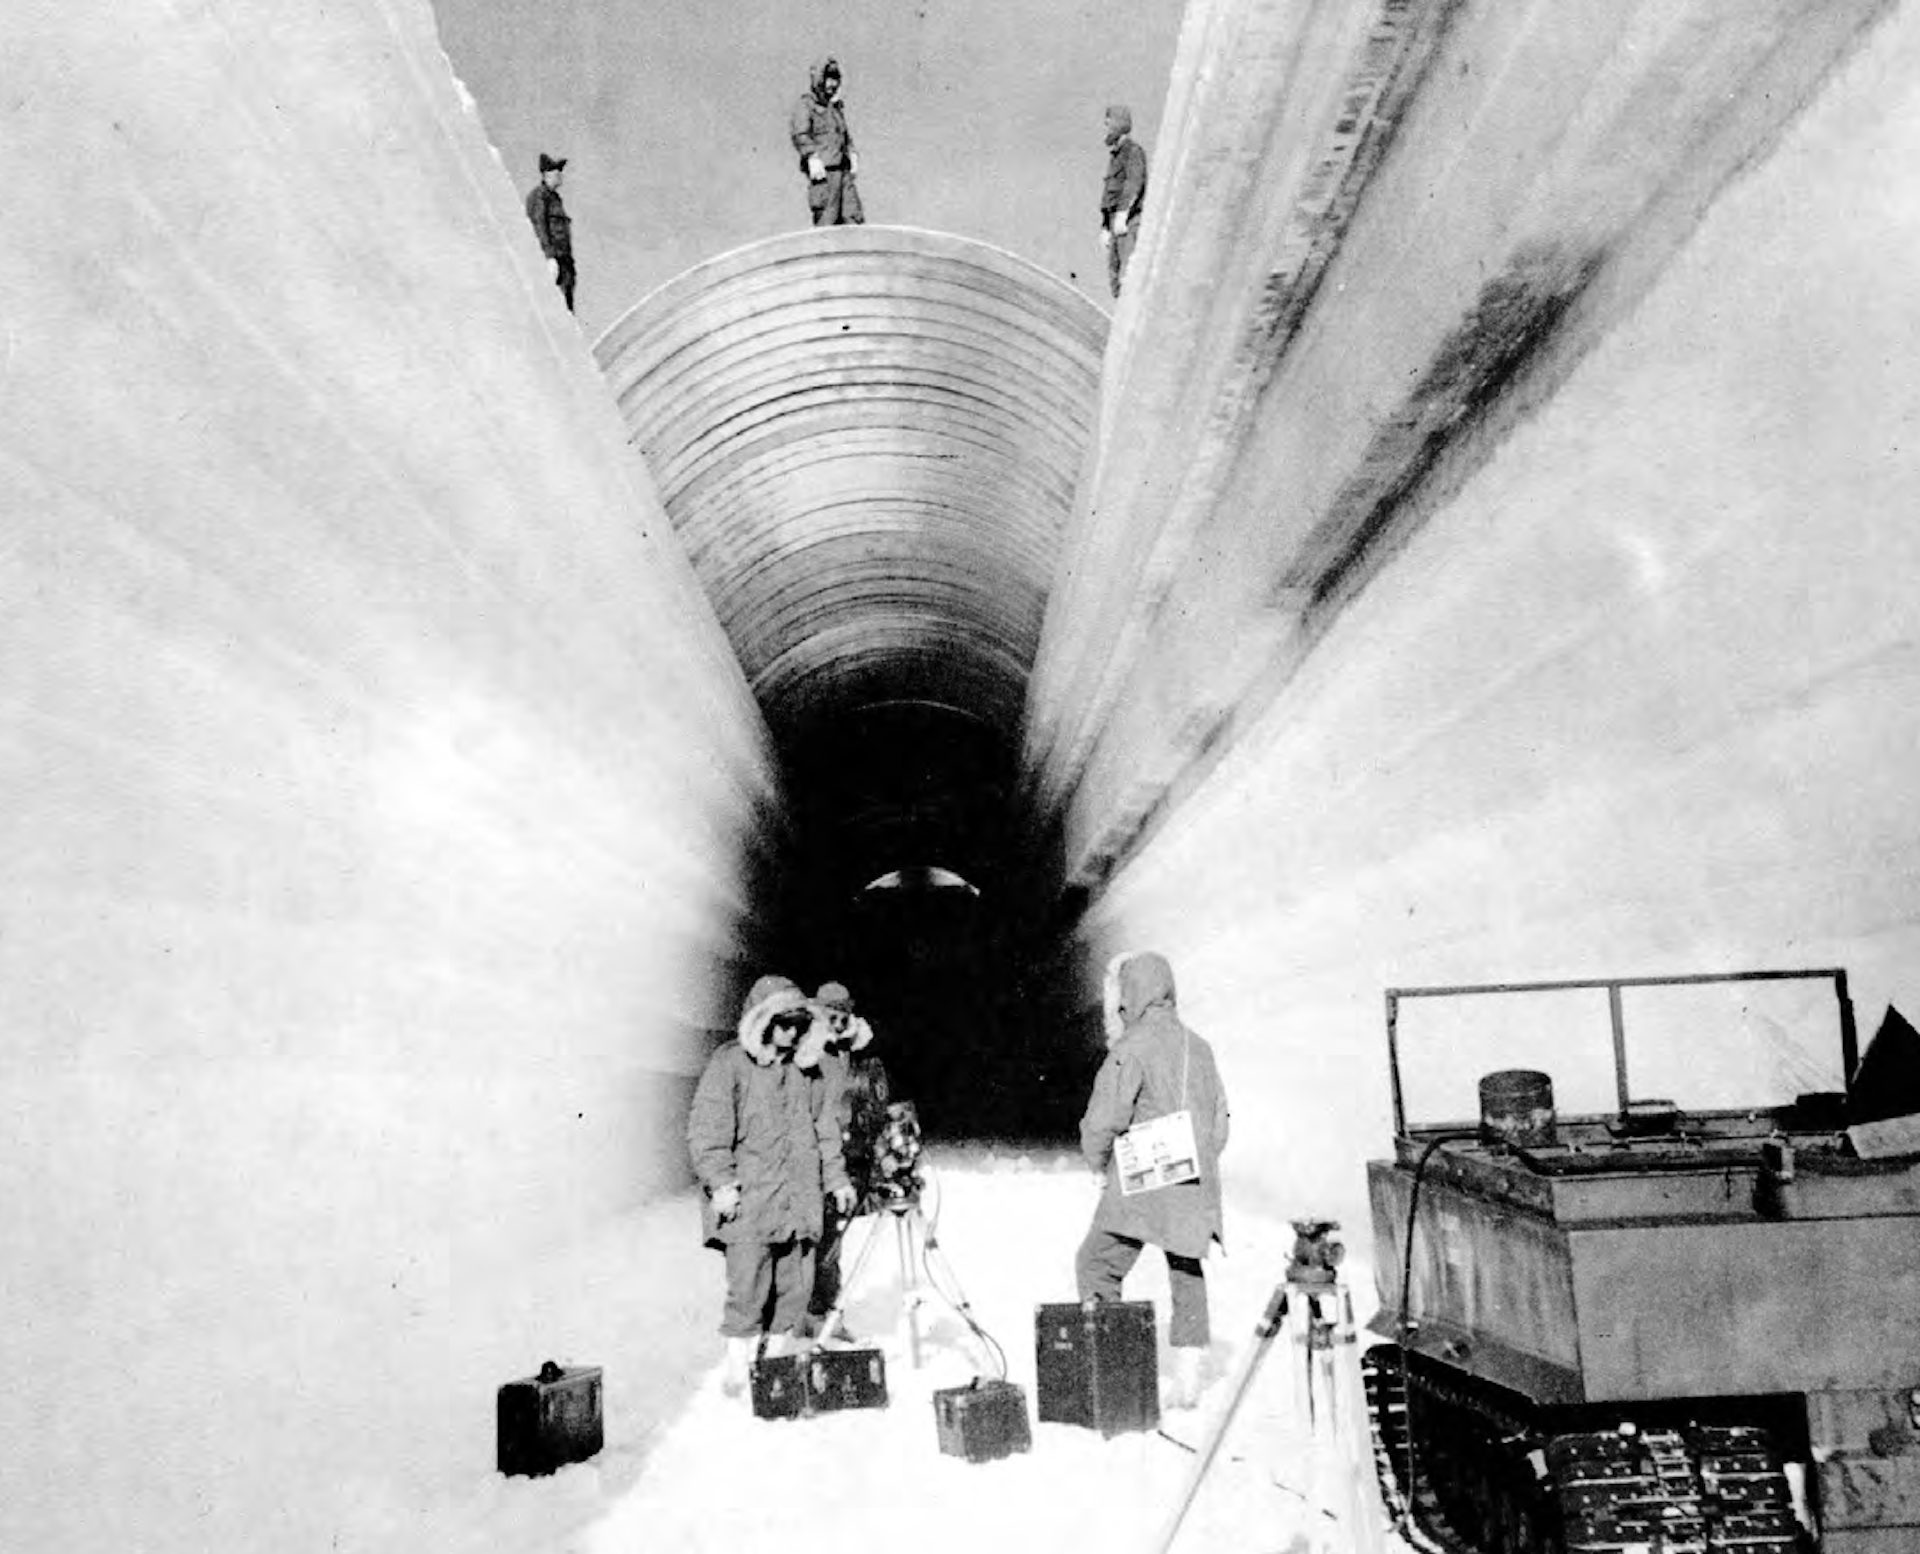 Three people stand at the opening of an icy trench with a half-round metal cover